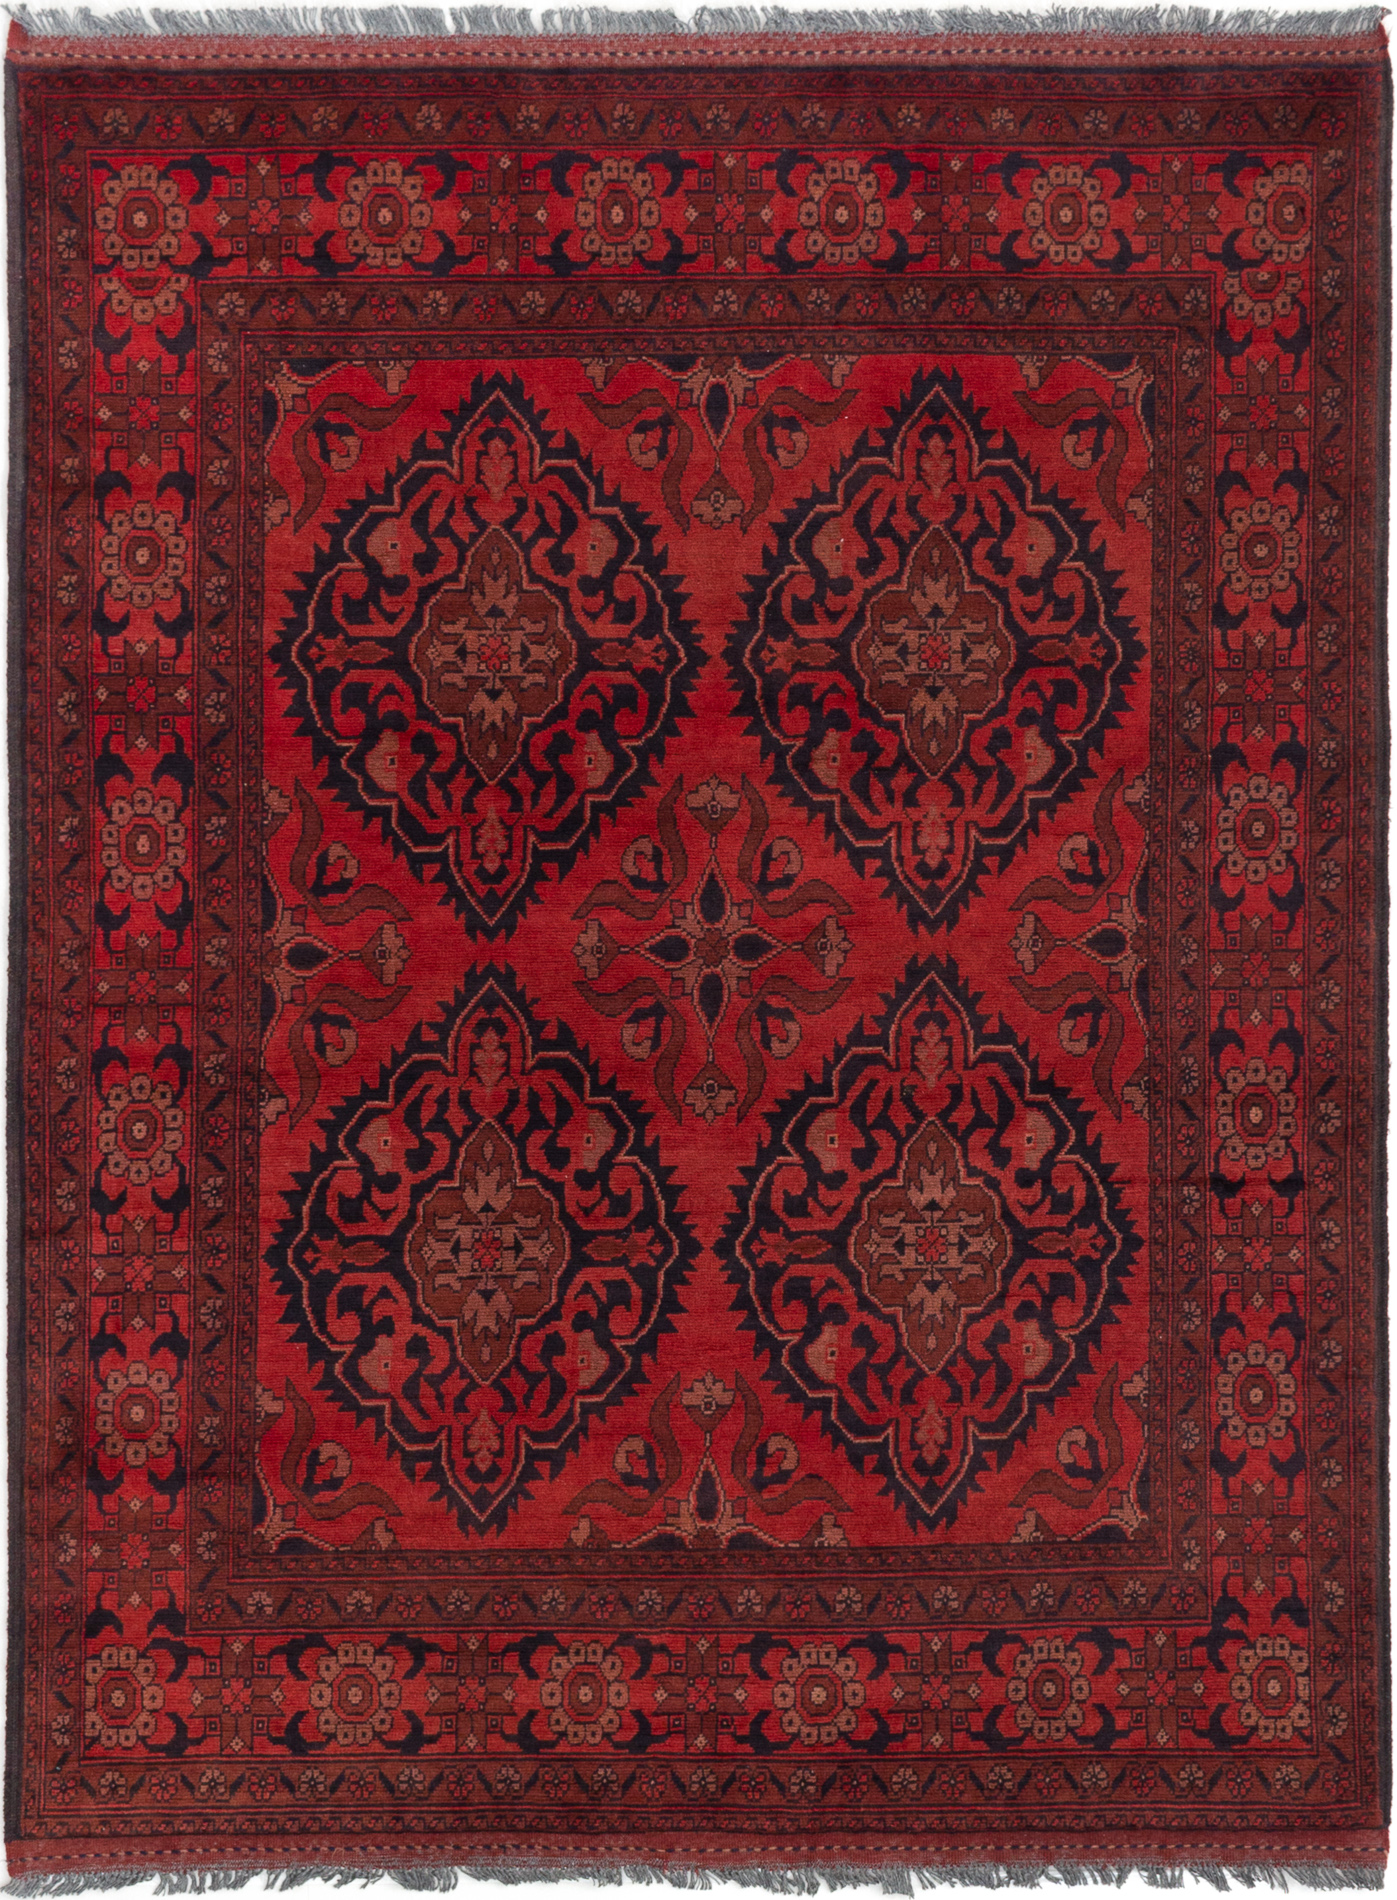 Hand-knotted Finest Khal Mohammadi Red Wool Rug 5'0" x 6'8"  Size: 5'0" x 6'8"  